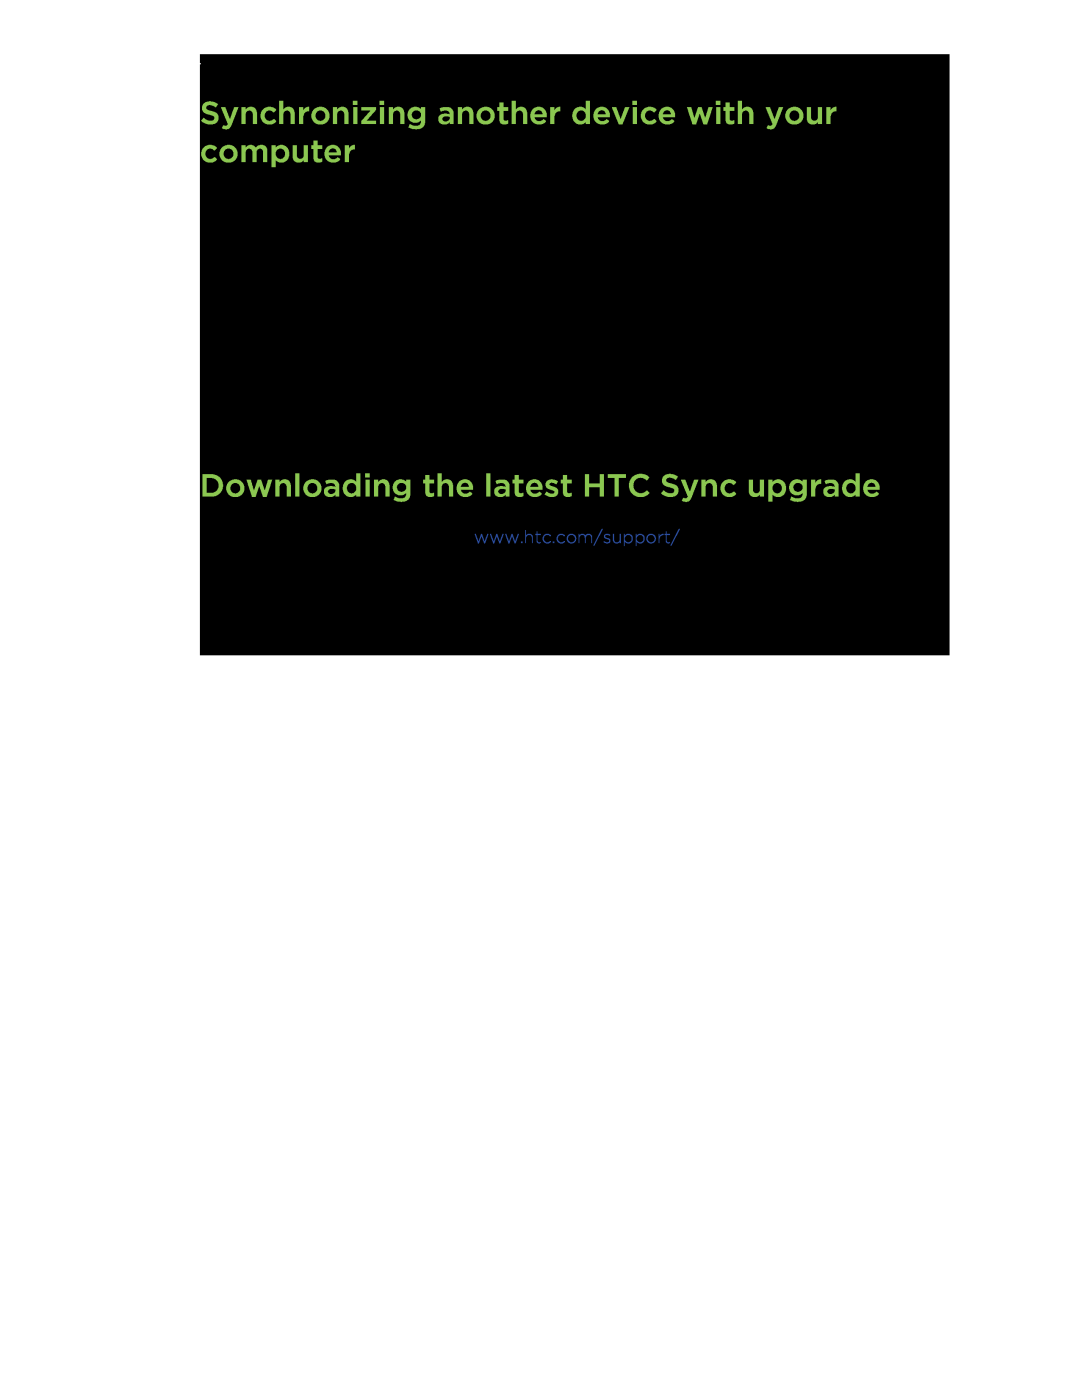 HTC HTCFlyerP512 manual Synchronizing another device with your computer, Downloading the latest HTC Sync upgrade 